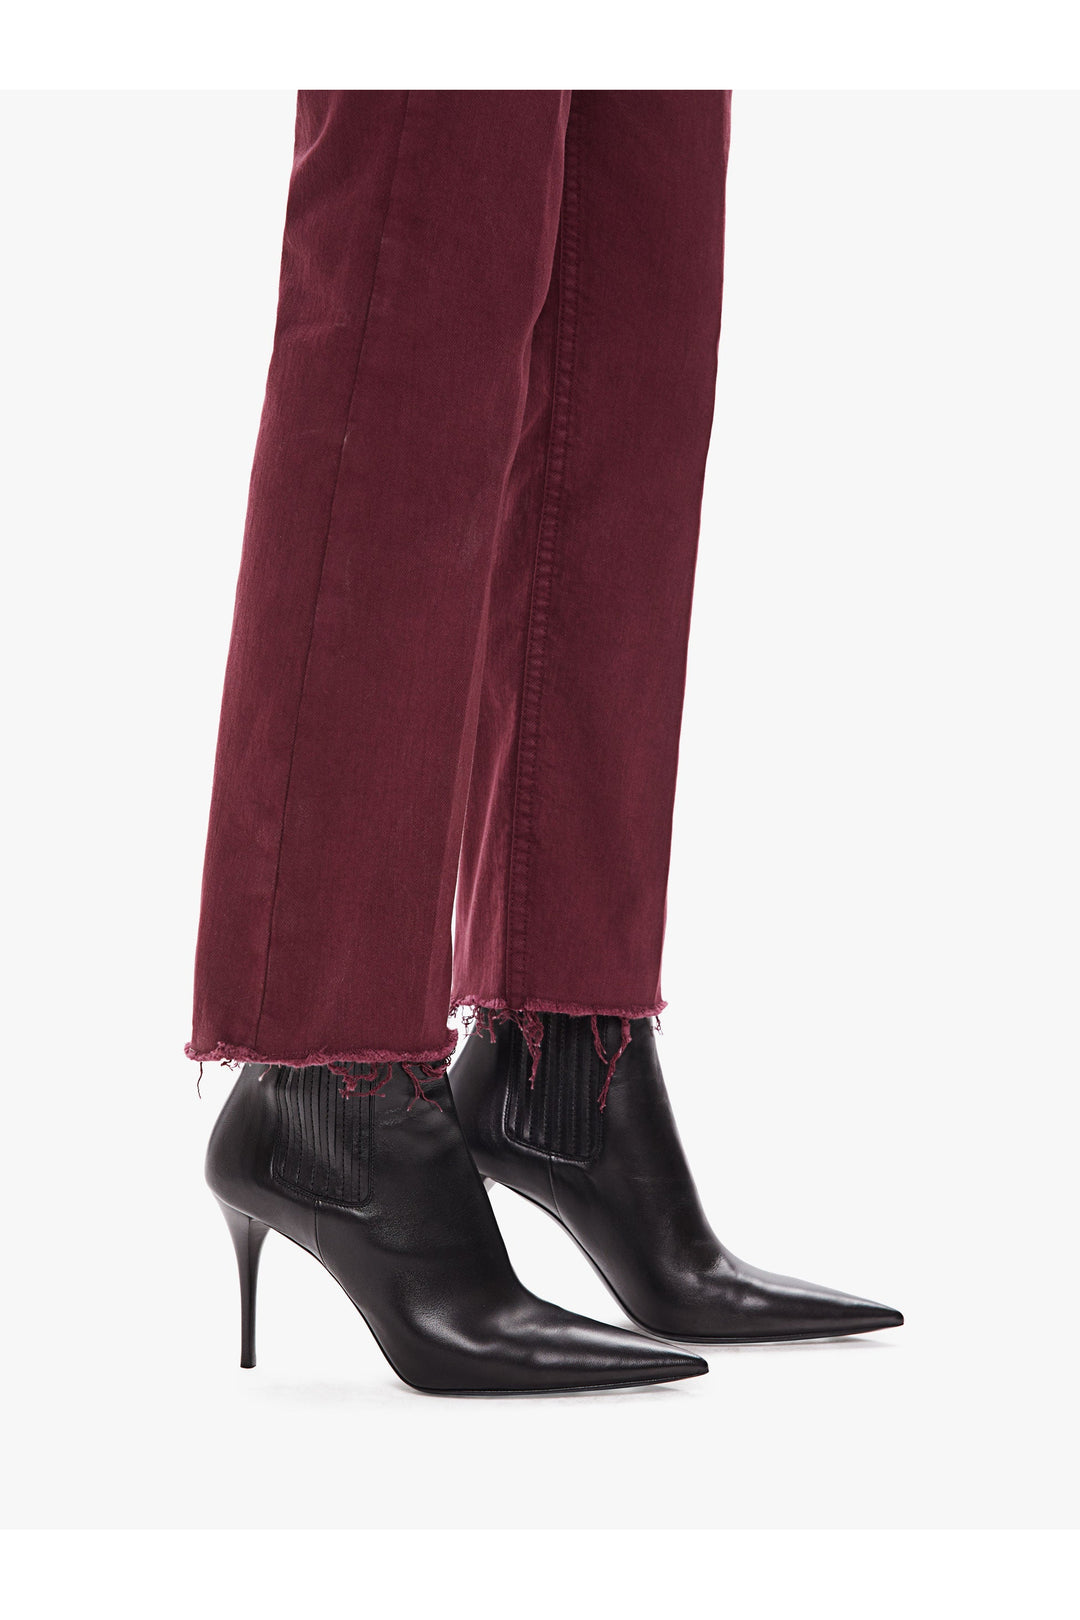 THE TRIPPER ANKLE FRAY BURGUNDY